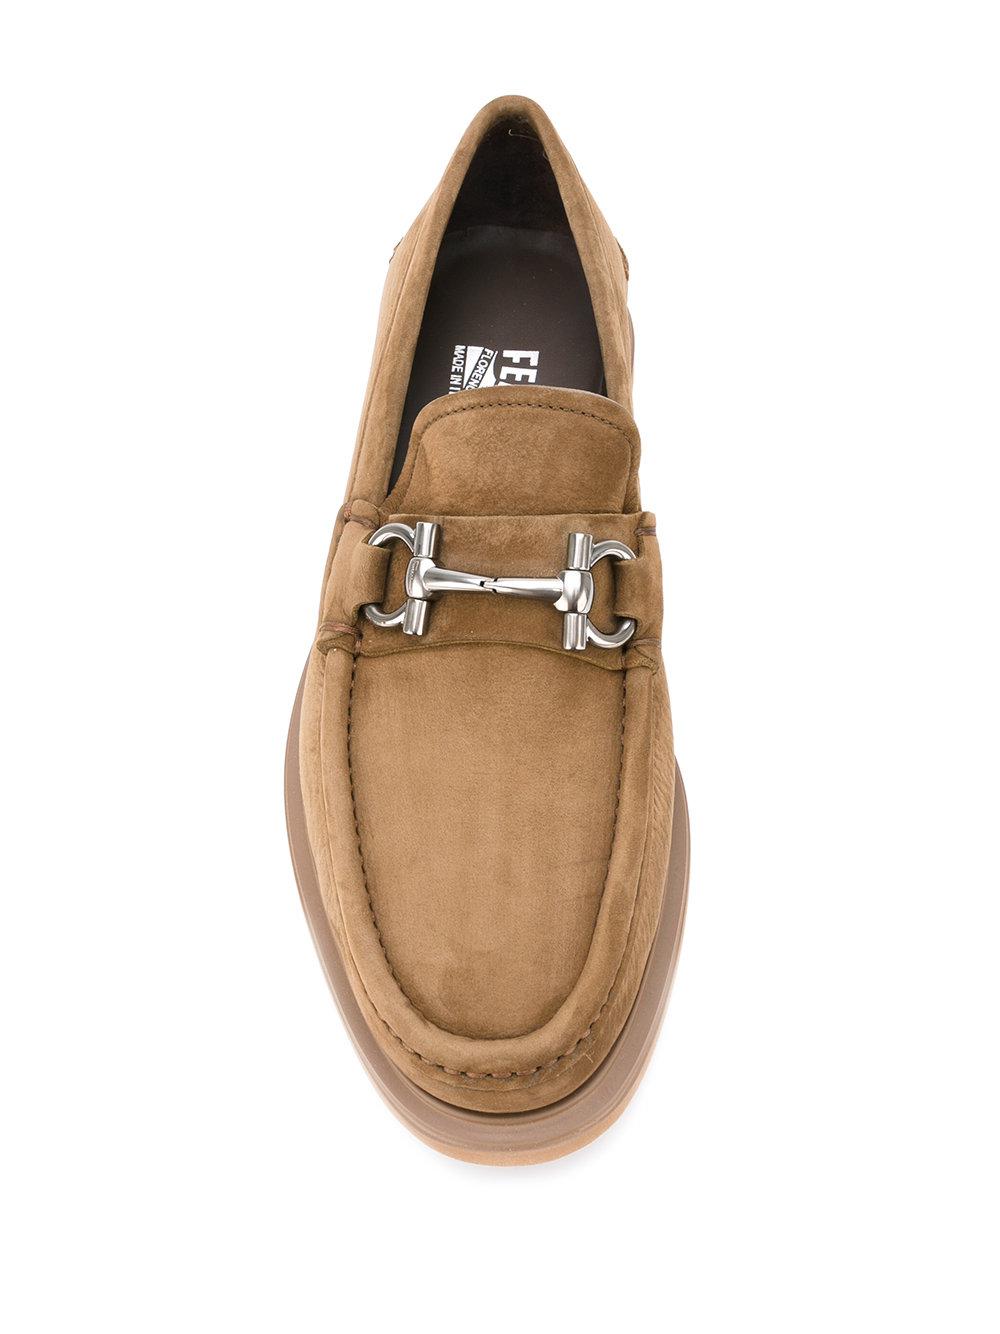 Ferragamo Suede Chunky Loafers in Brown for Men - Lyst